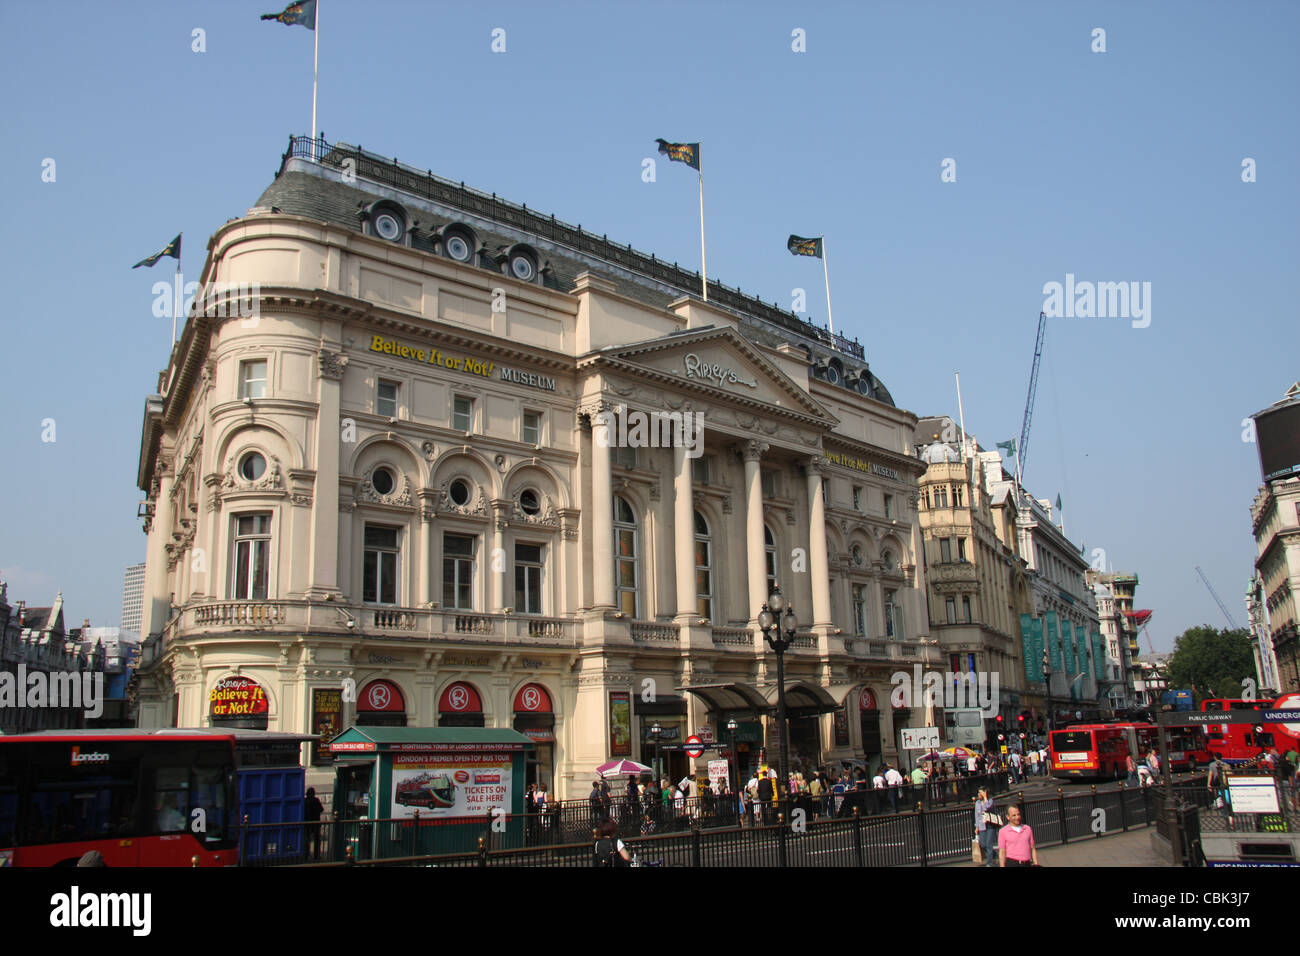 Ripley's Believe It or Not! Museum, Piccadilly Circus, London Stock Photo